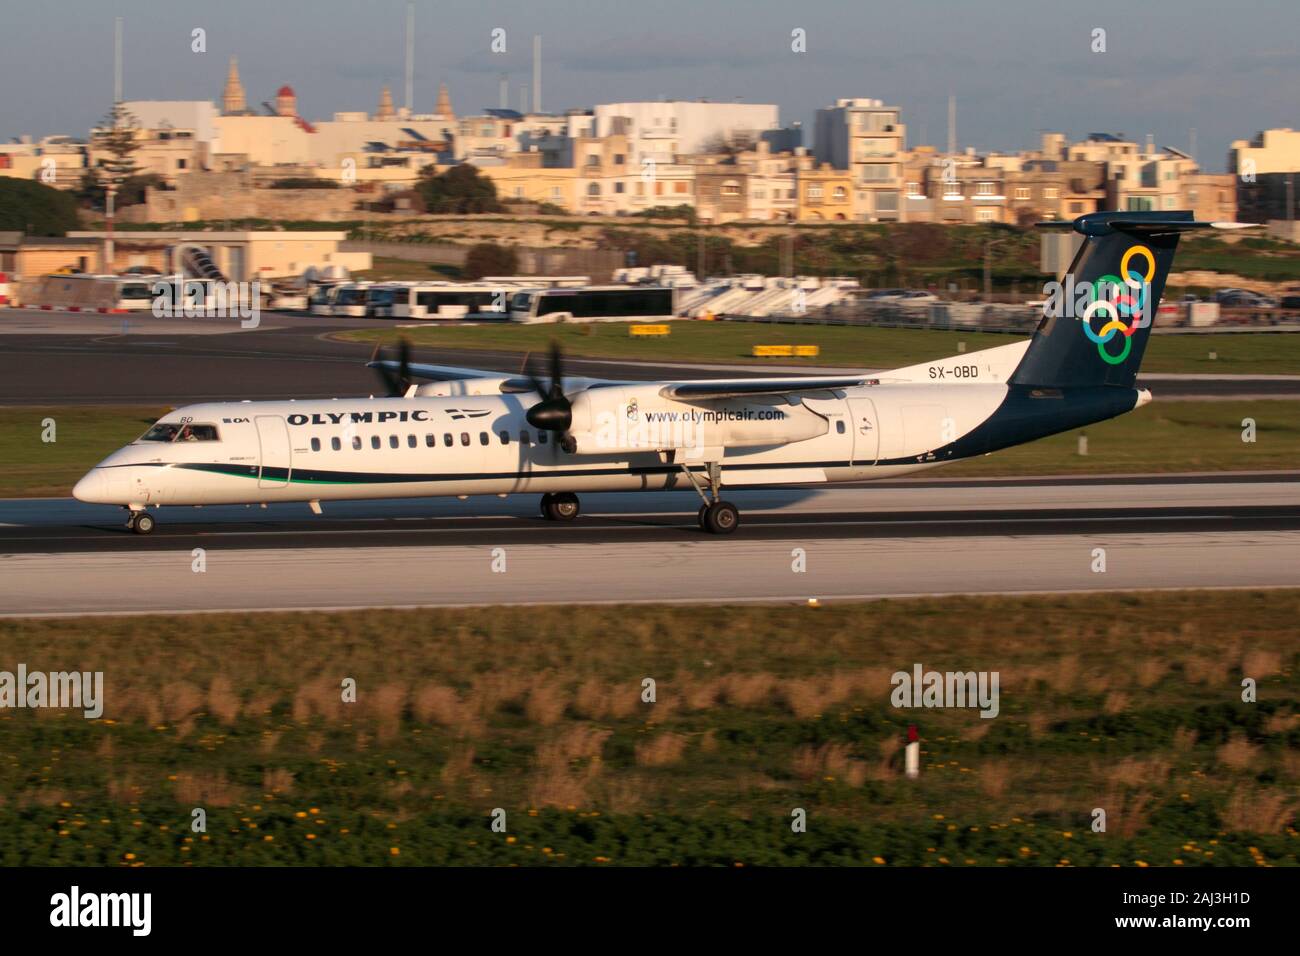 Bombardier Dash 8-Q400 turboprop airliner belonging to Greek airline Olympic Air shown departing from Malta. Air travel in the EU. Short haul flights. Stock Photo